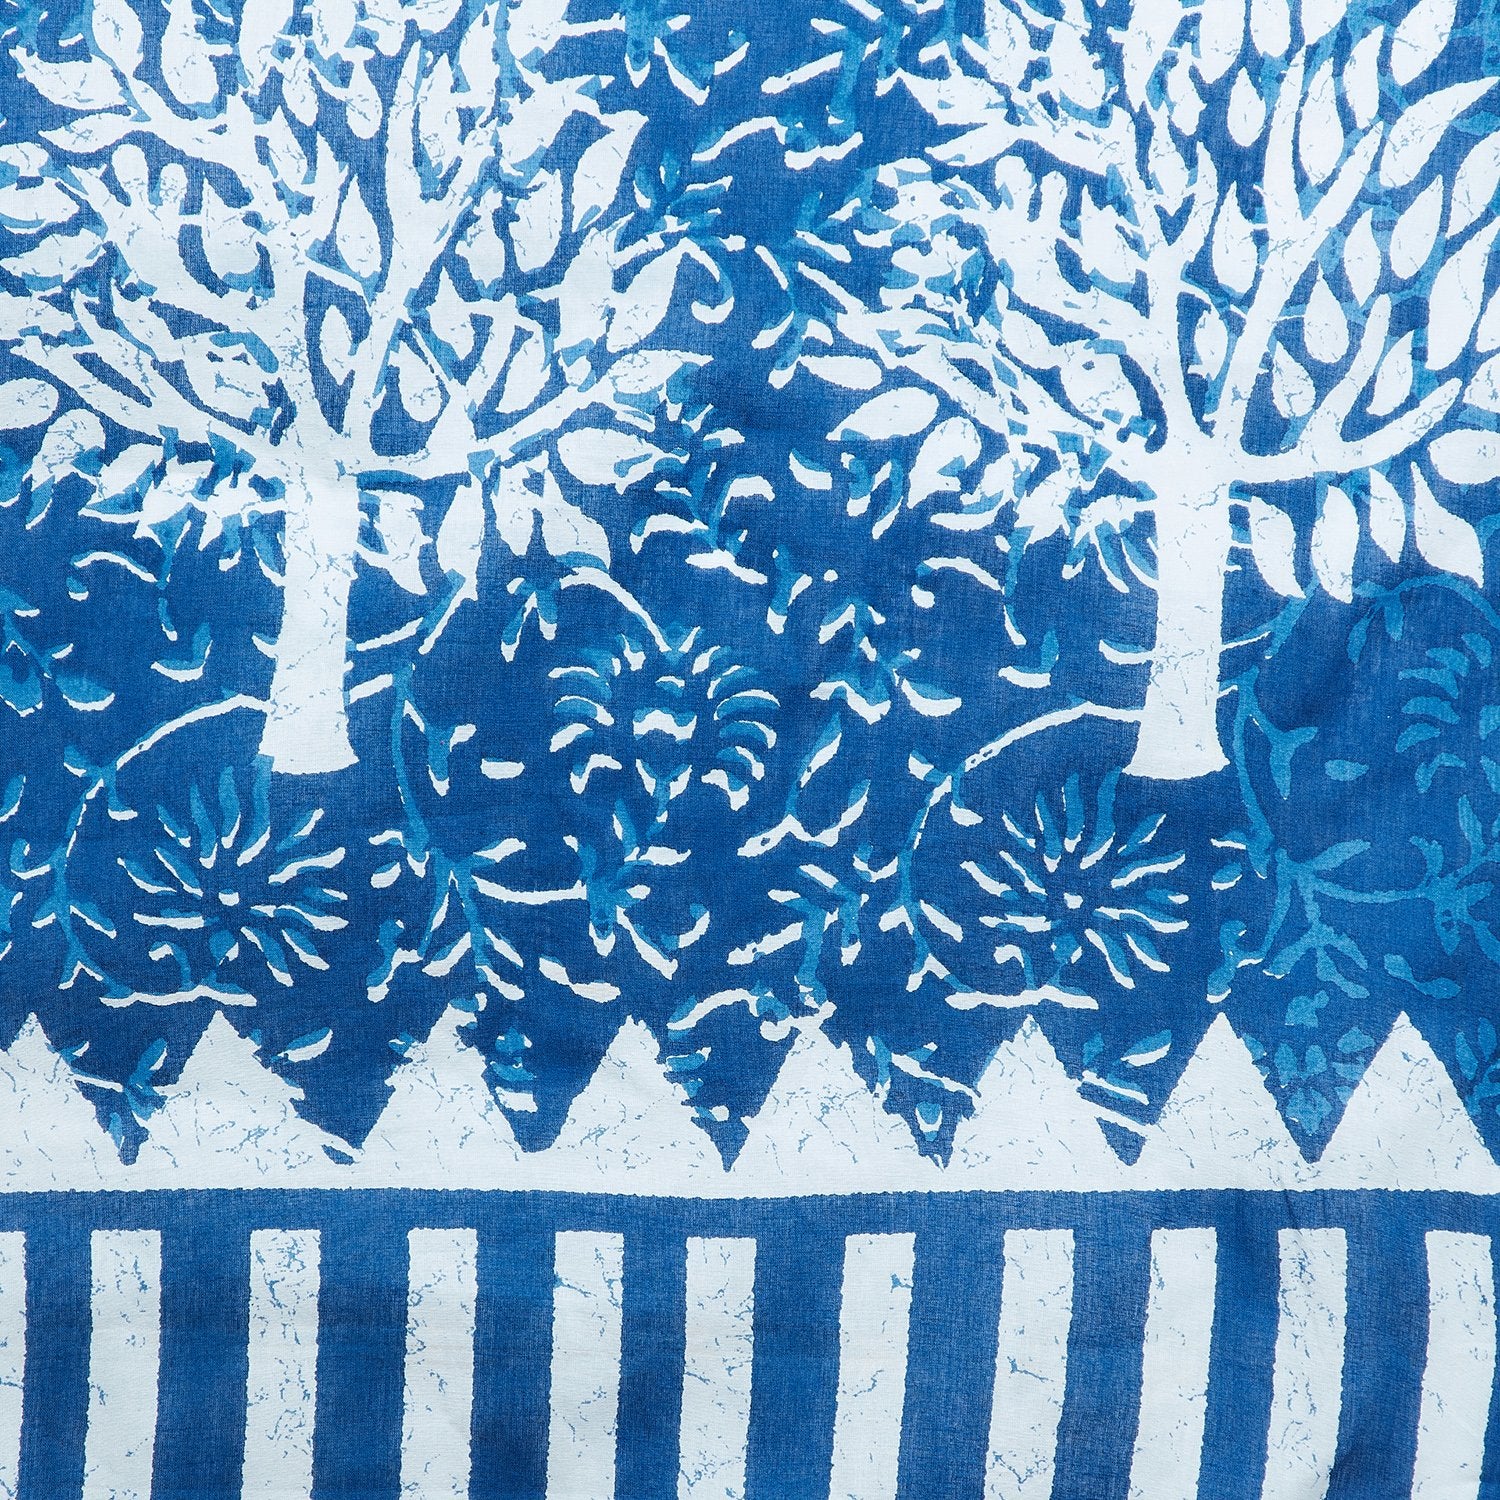 Blue Indigo Screen Print Handcrafted Cotton Saree-Saree-Kalakari India-RDSNSA0109-Cotton, Geographical Indication, Hand Blocks, Hand Crafted, Heritage Prints, Indigo, Sarees, Screen Print, Sustainable Fabrics-[Linen,Ethnic,wear,Fashionista,Handloom,Handicraft,Indigo,blockprint,block,print,Cotton,Chanderi,Blue, latest,classy,party,bollywood,trendy,summer,style,traditional,formal,elegant,unique,style,hand,block,print, dabu,booti,gift,present,glamorous,affordable,collectible,Sari,Saree,printed, hol